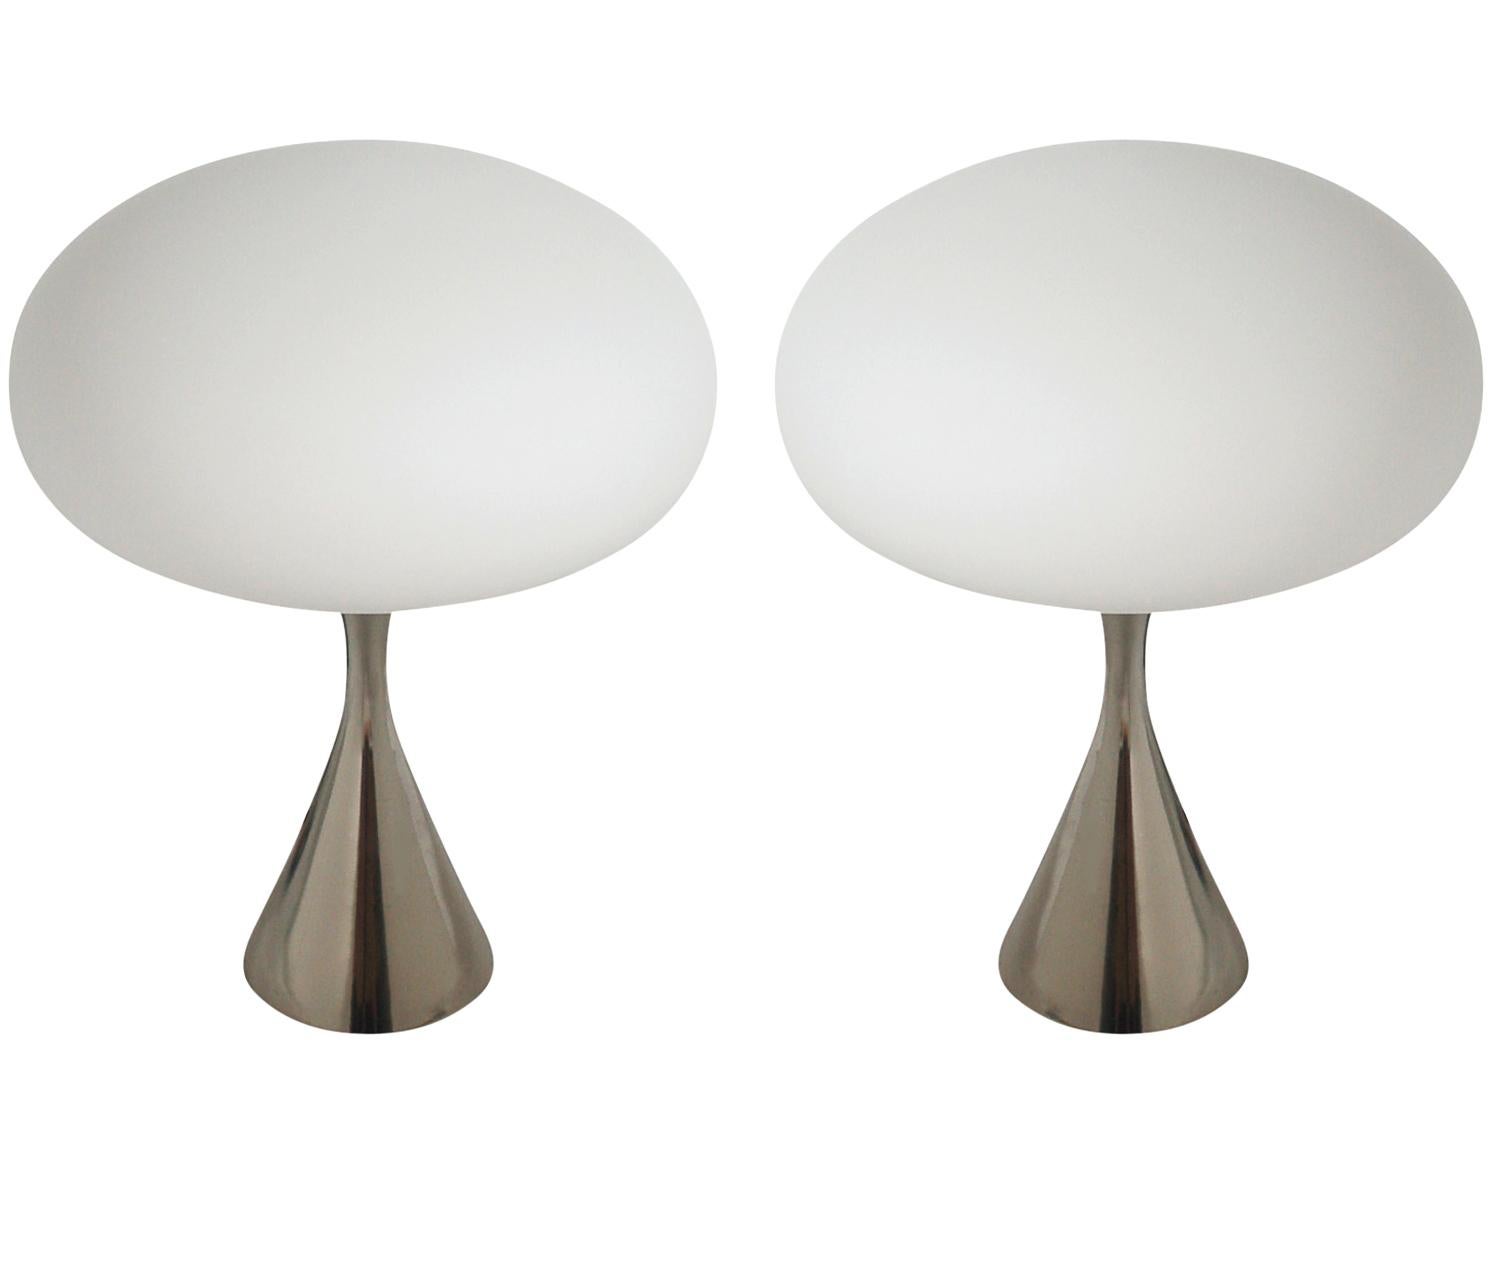 Pair of Mid-Century Modern Table Lamps by Designline in Chrome & White Glass In New Condition For Sale In Philadelphia, PA